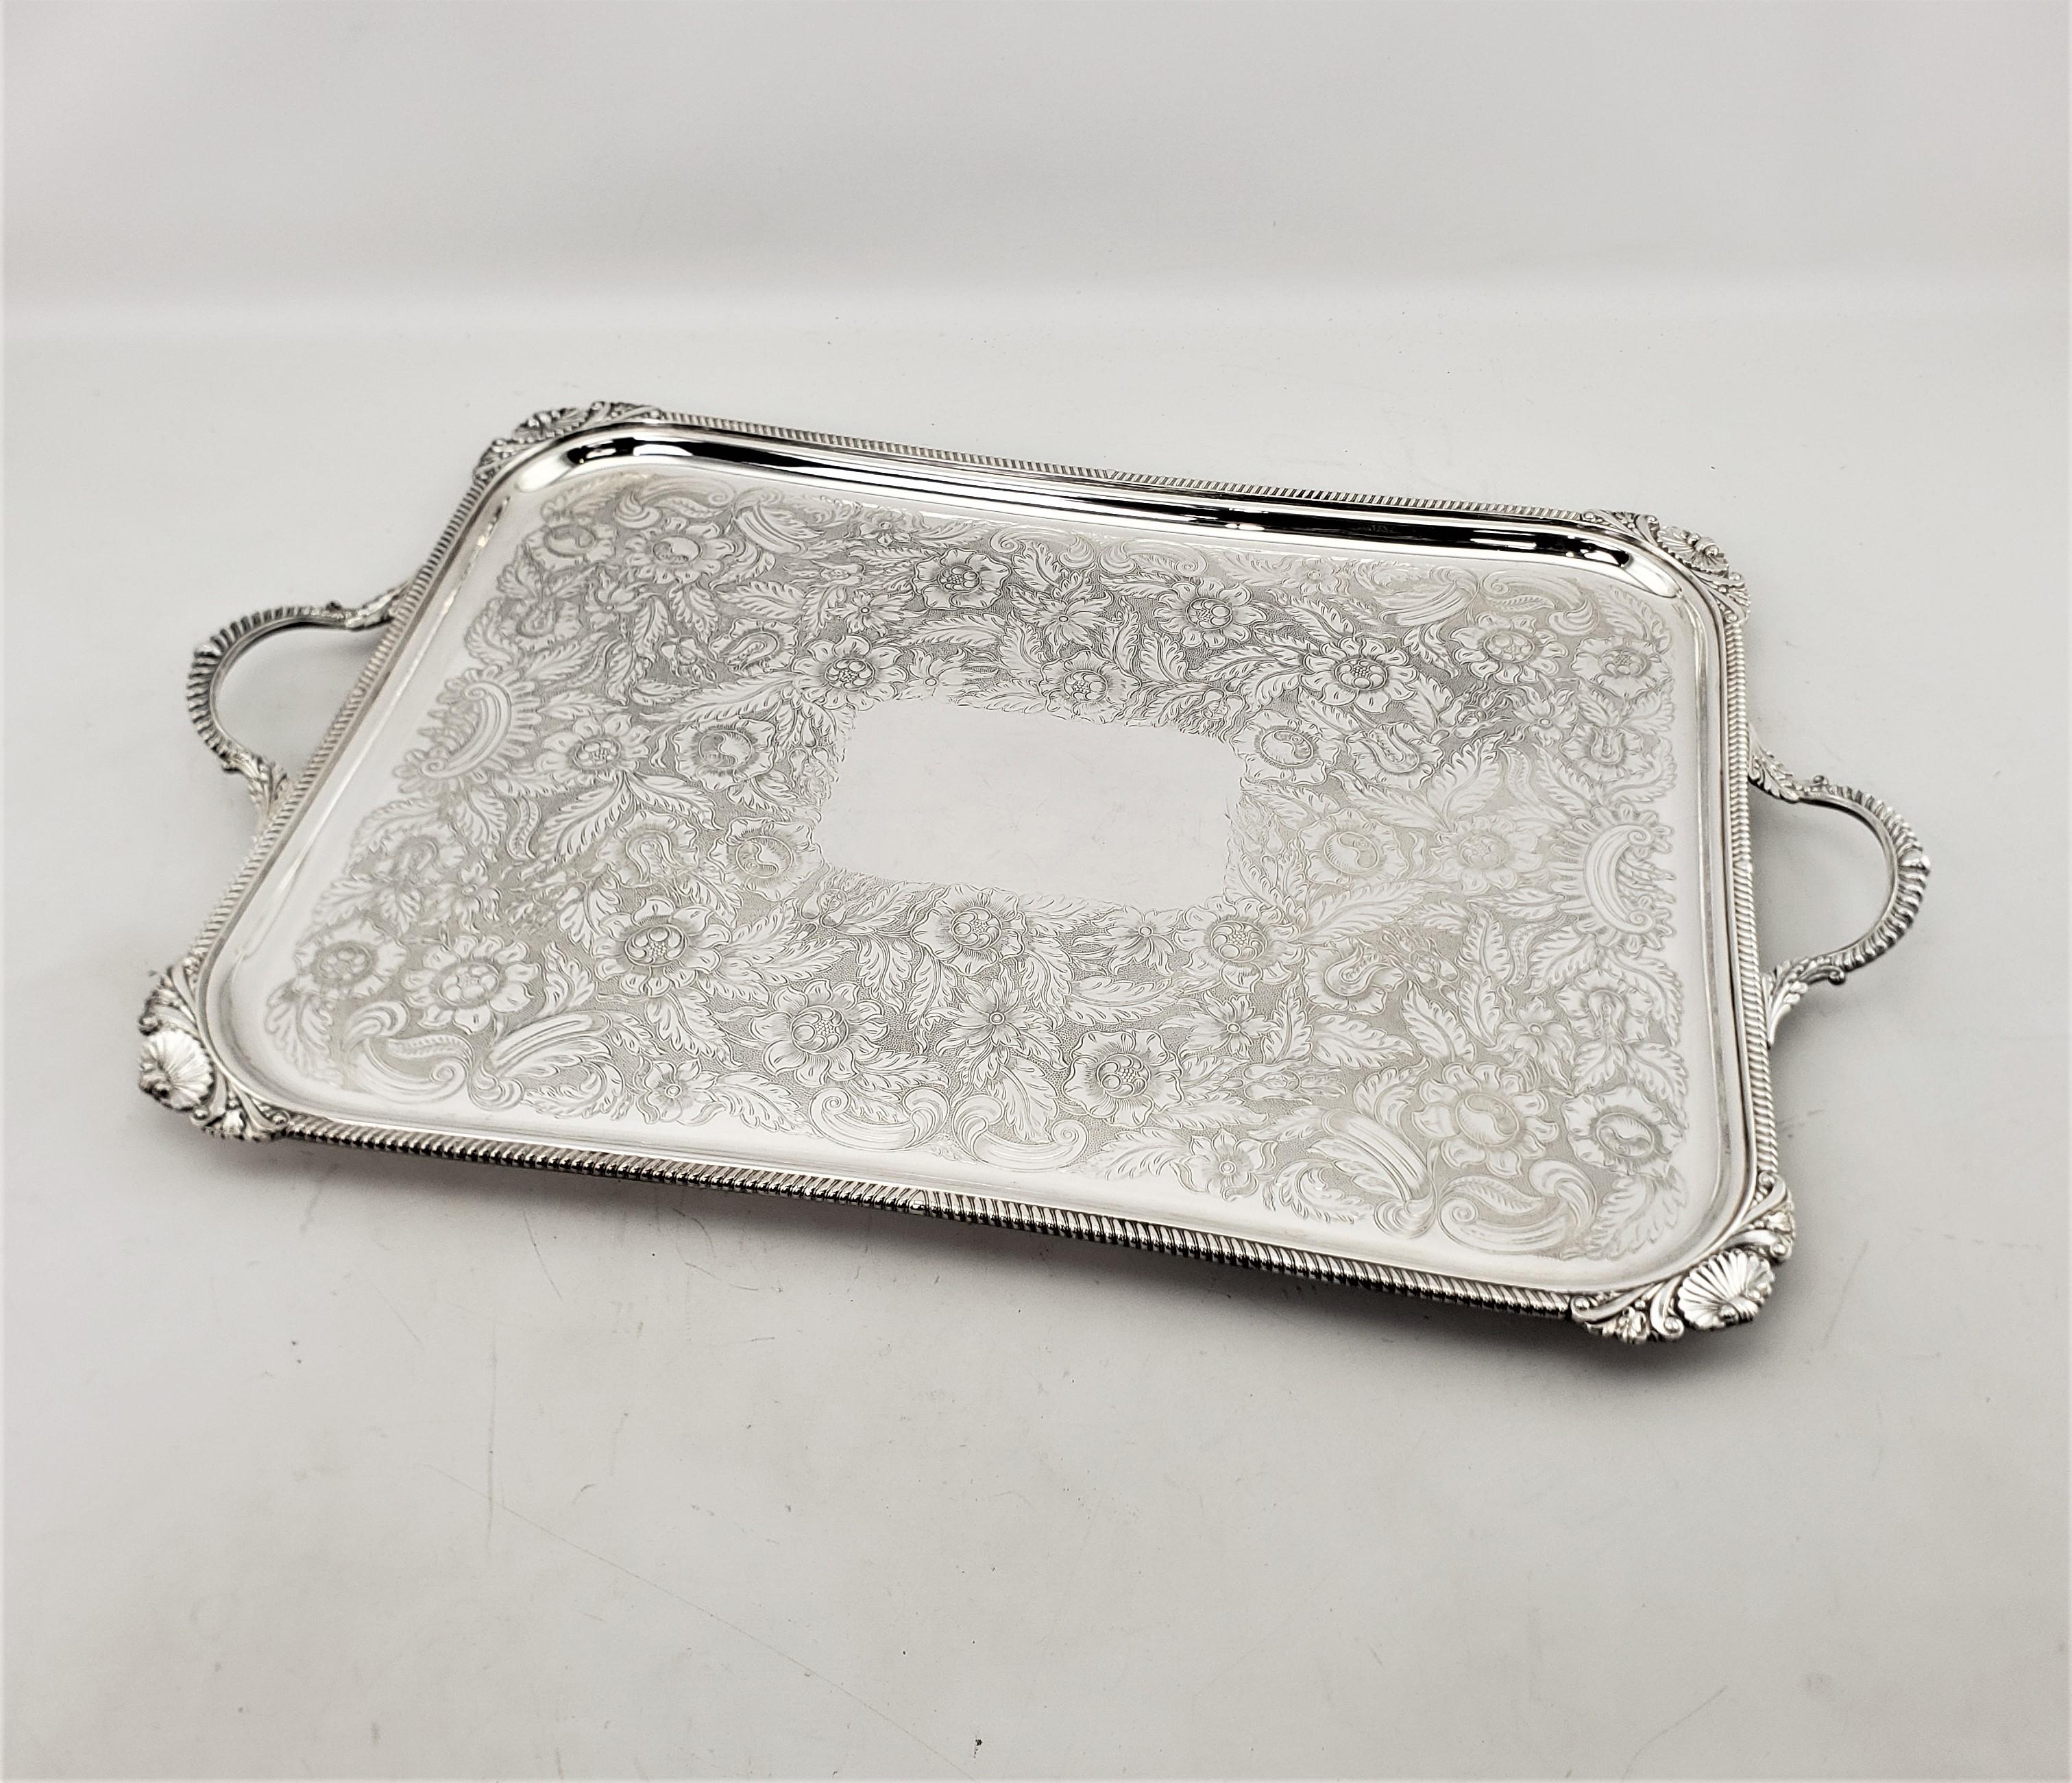 Antique Birks Large Silver Plated Rectangular Serving Tray with Floral Engraving For Sale 6